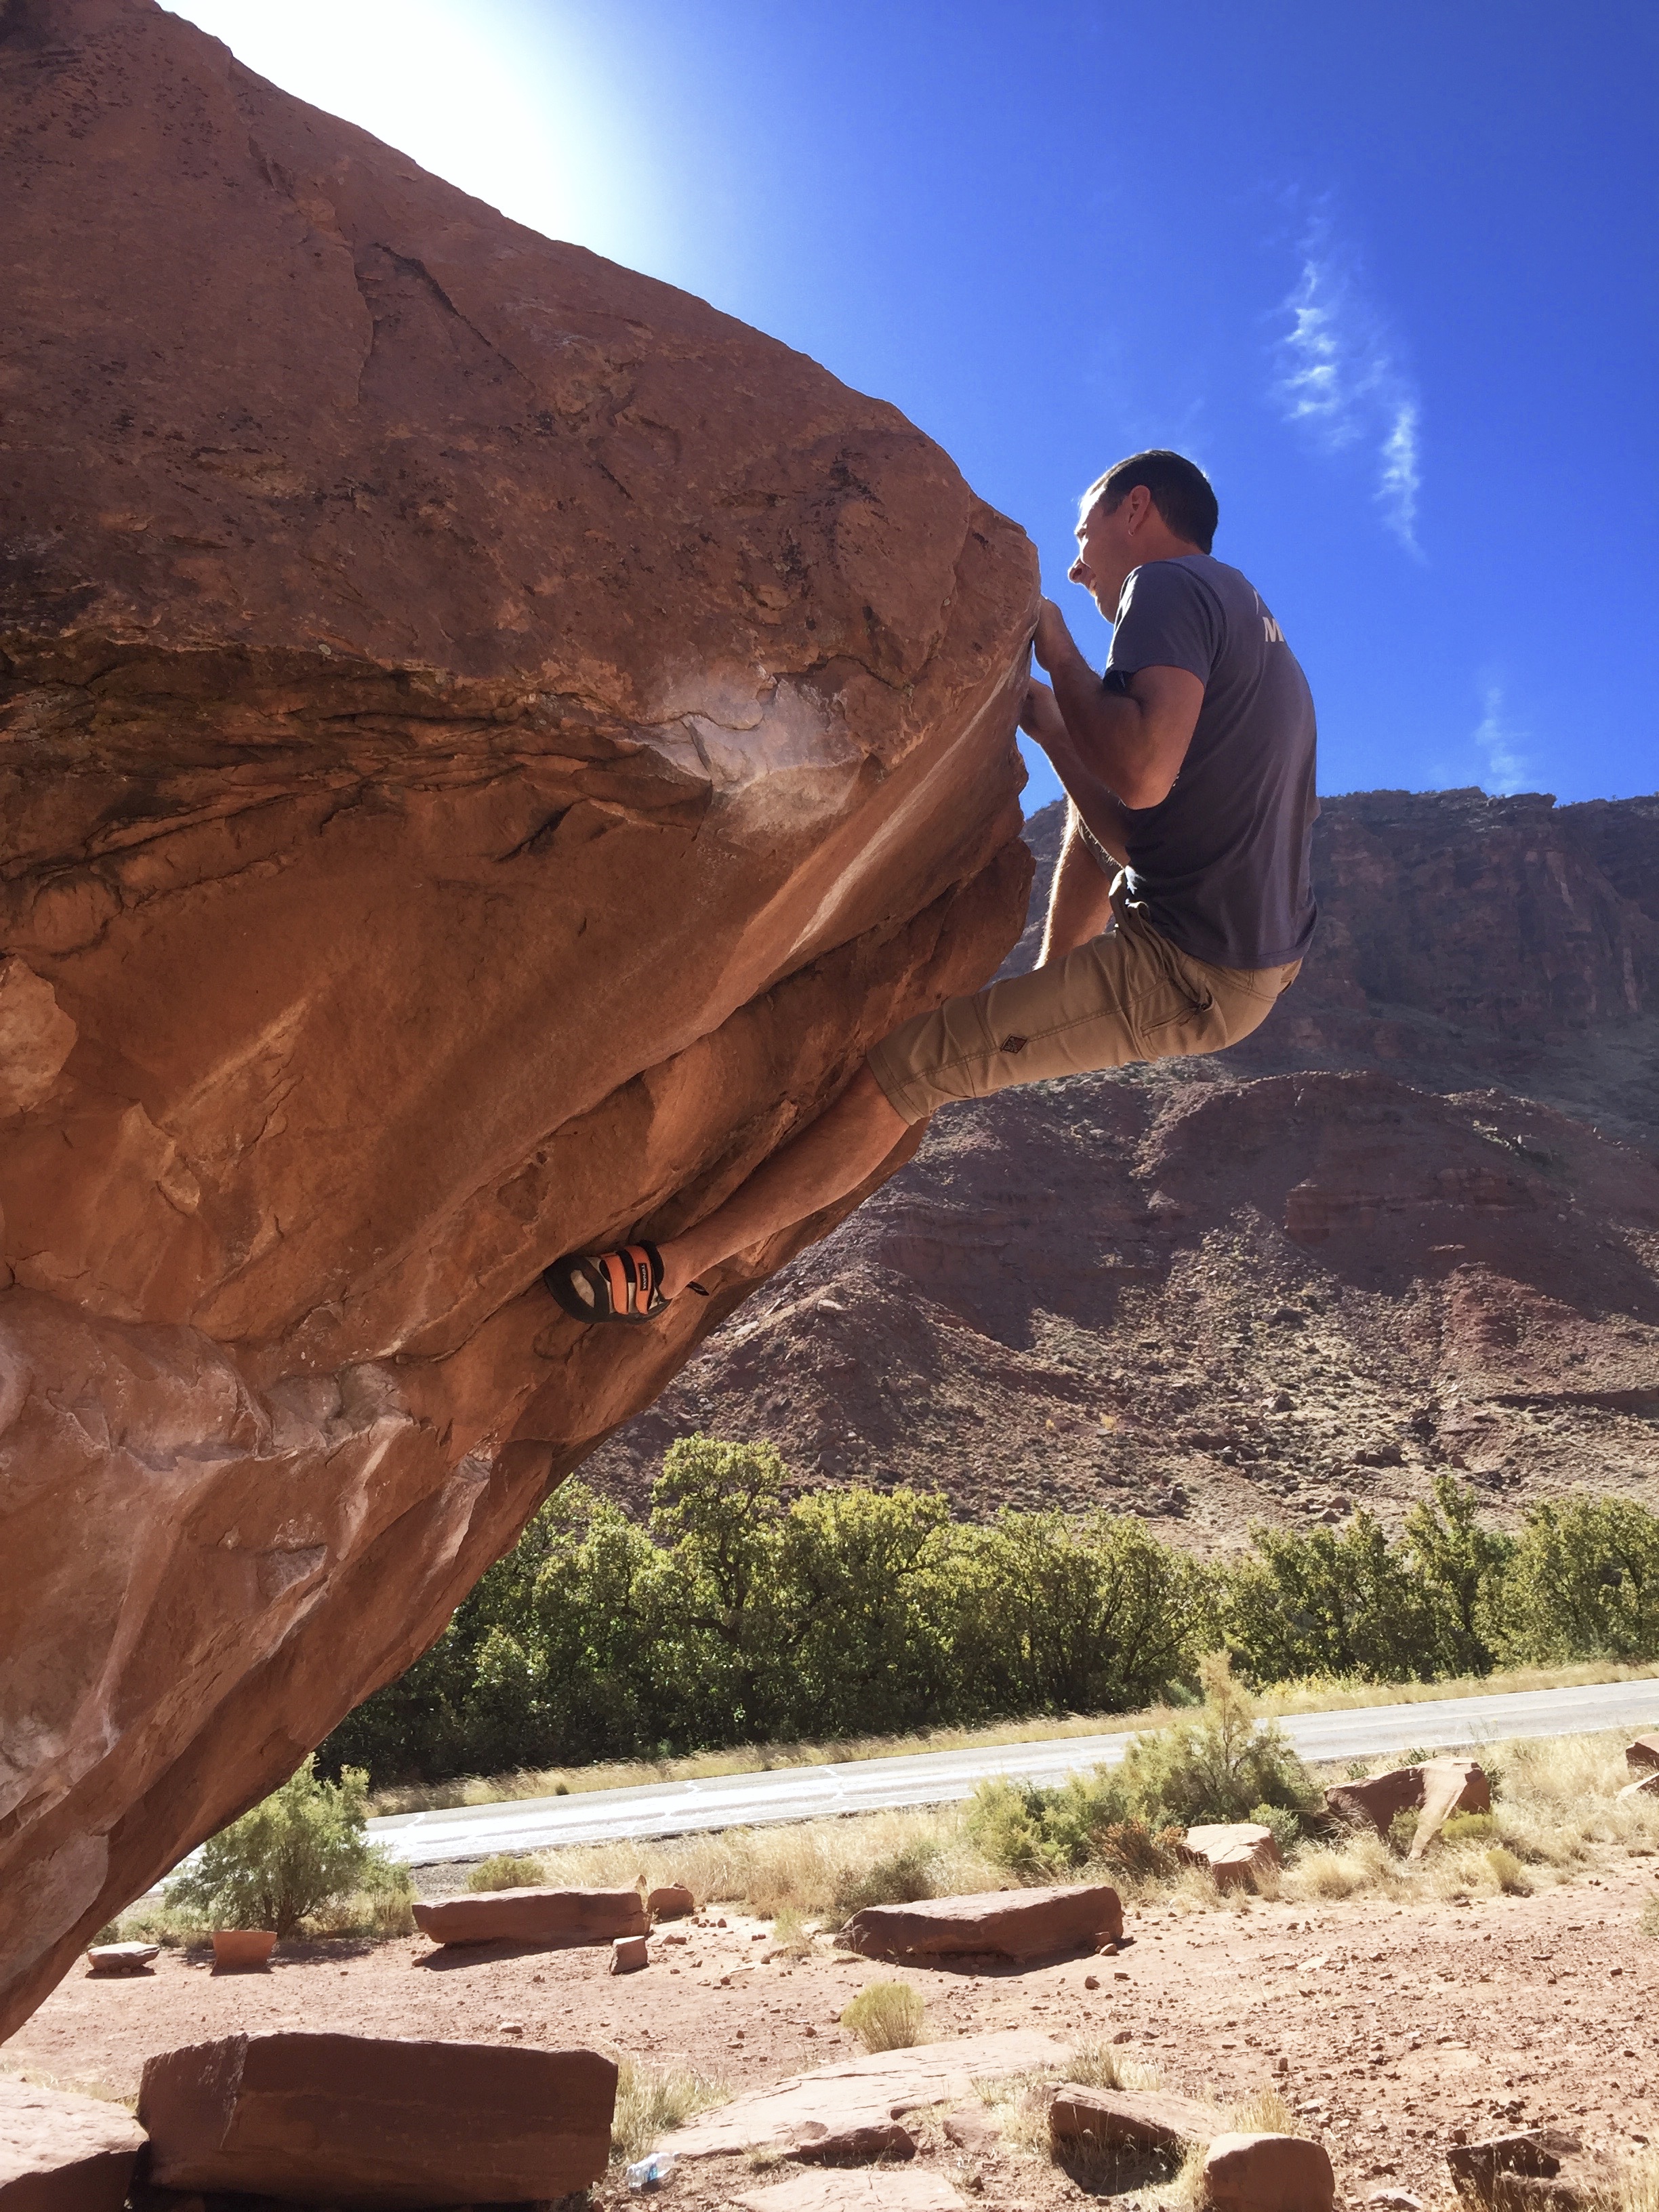 Mike Lewis rocks onto his right foot to finish Circus Trick (V5) at the Big Bend Boulders near Moab, Utah. [Photo] Drew Maloney